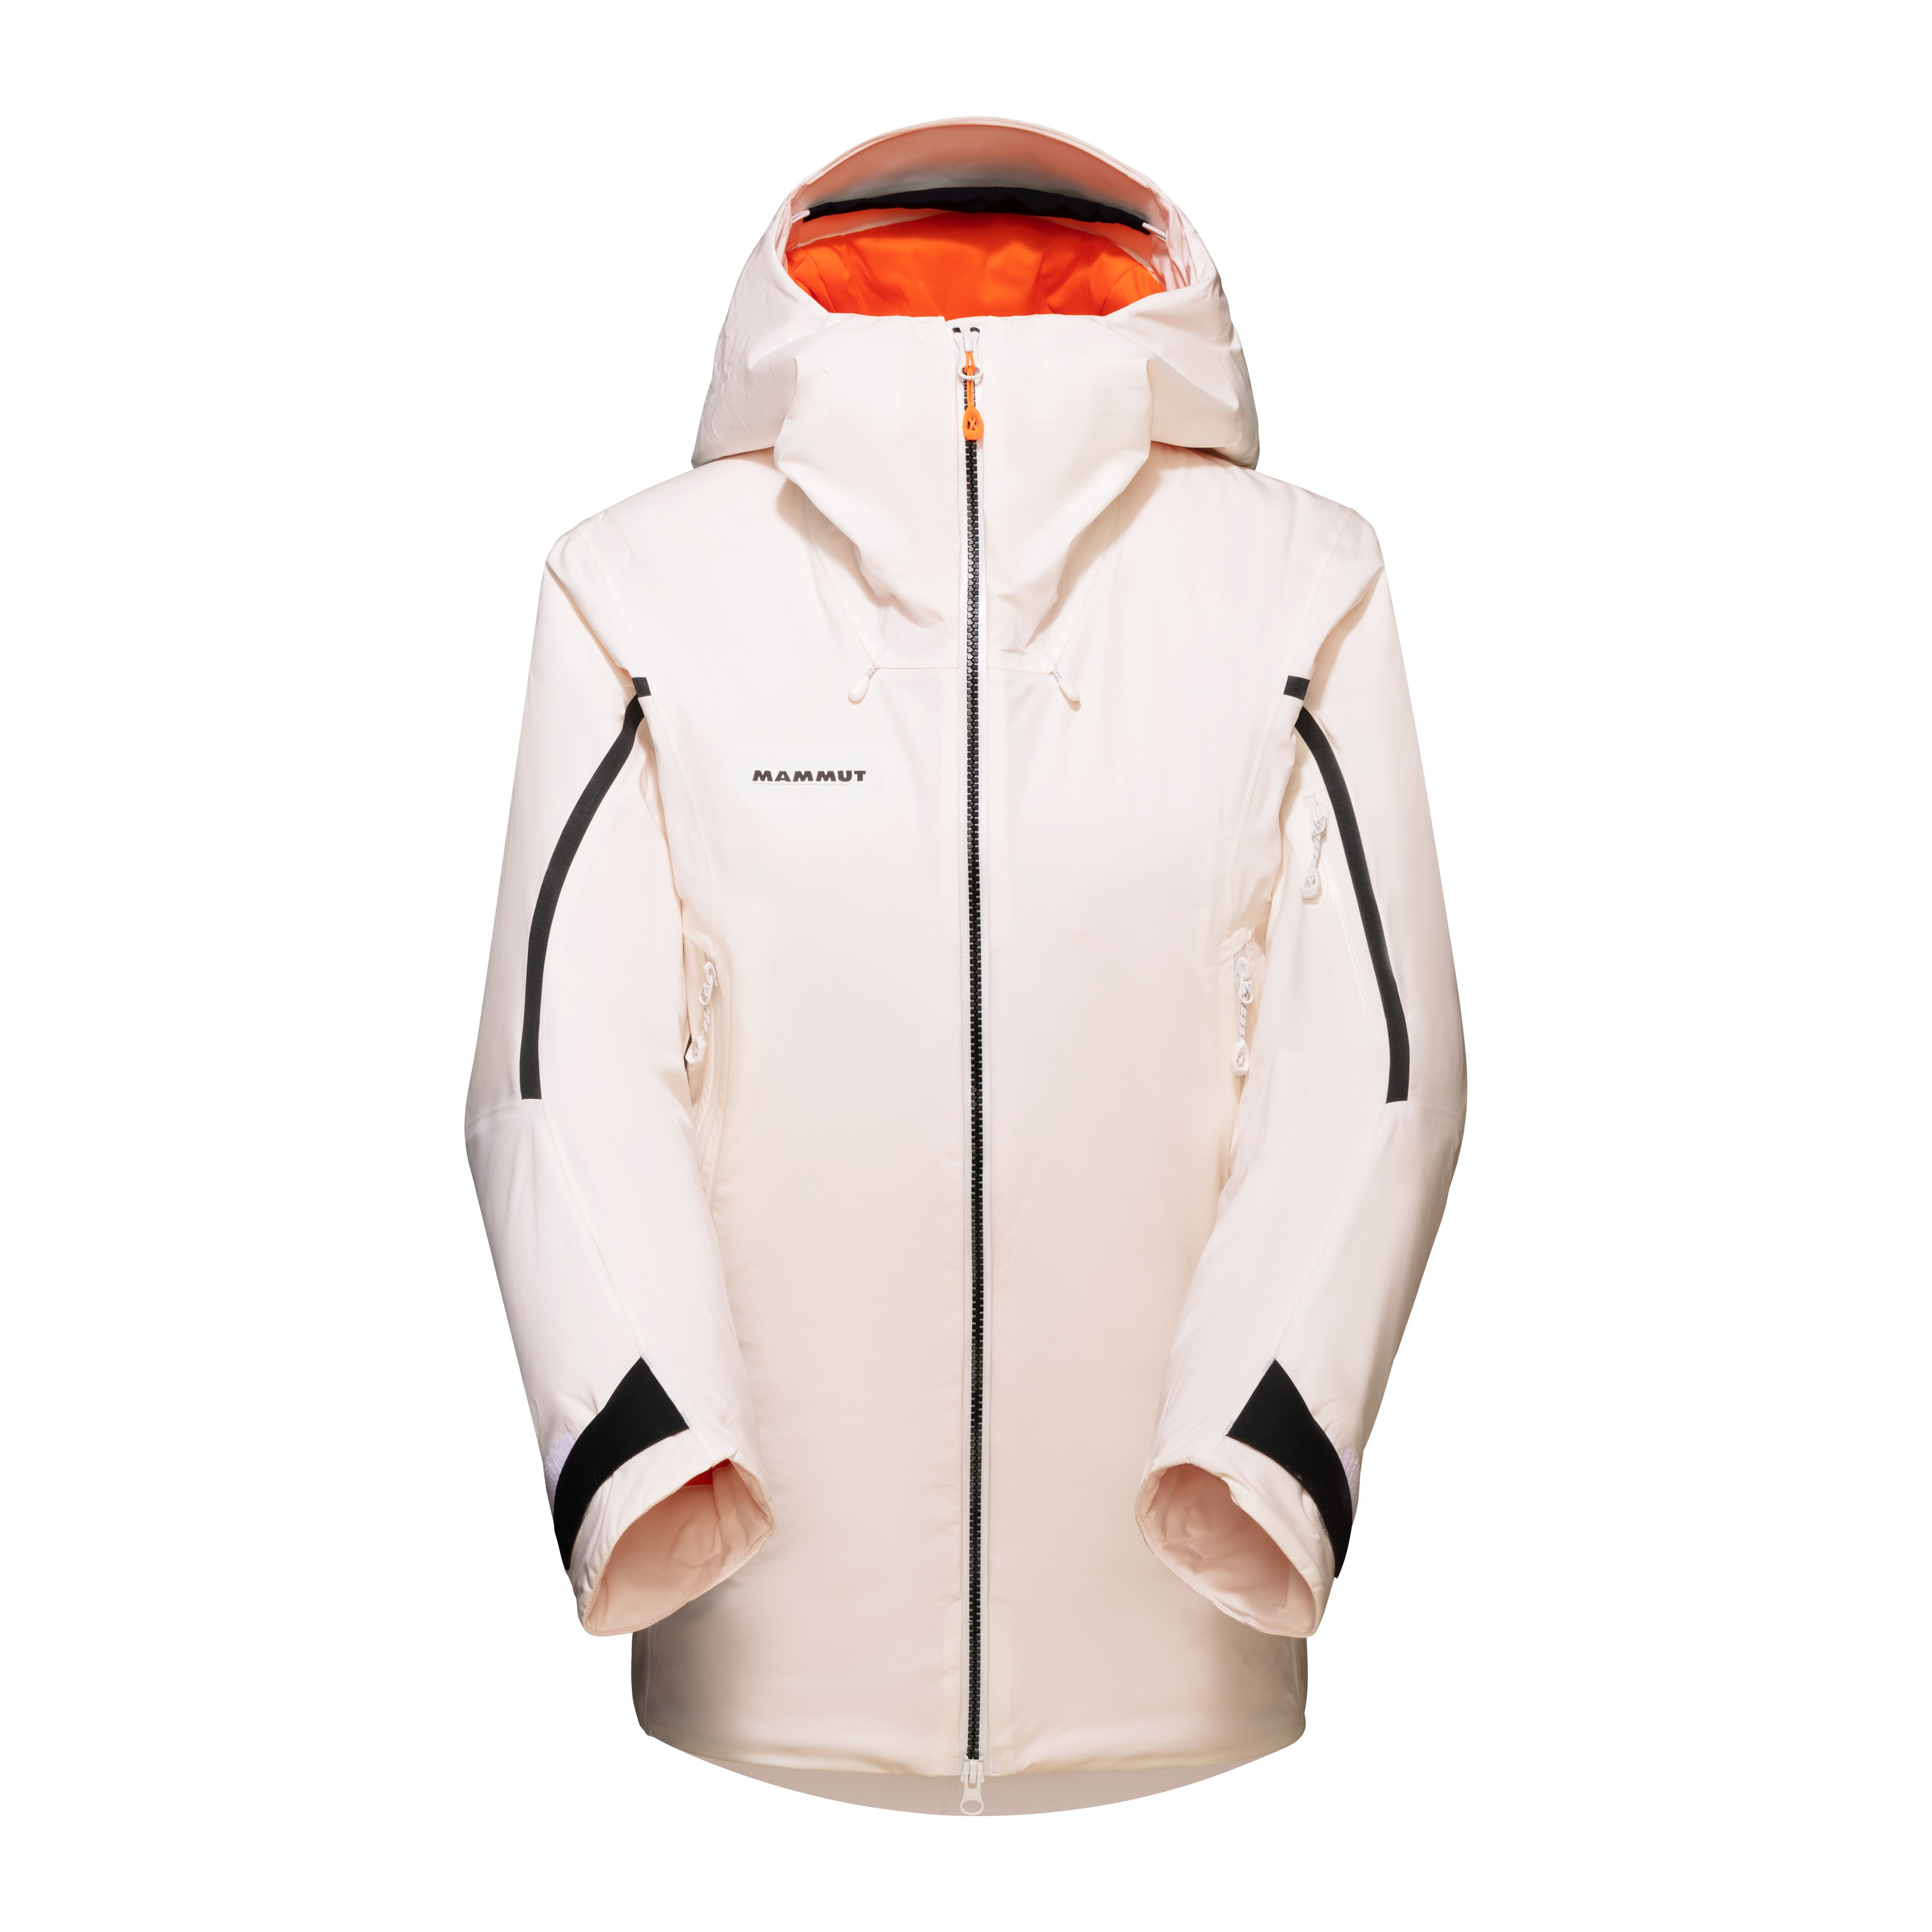 Nordwand Thermo HS Hooded Jacket Women - bright white, XL thumbnail